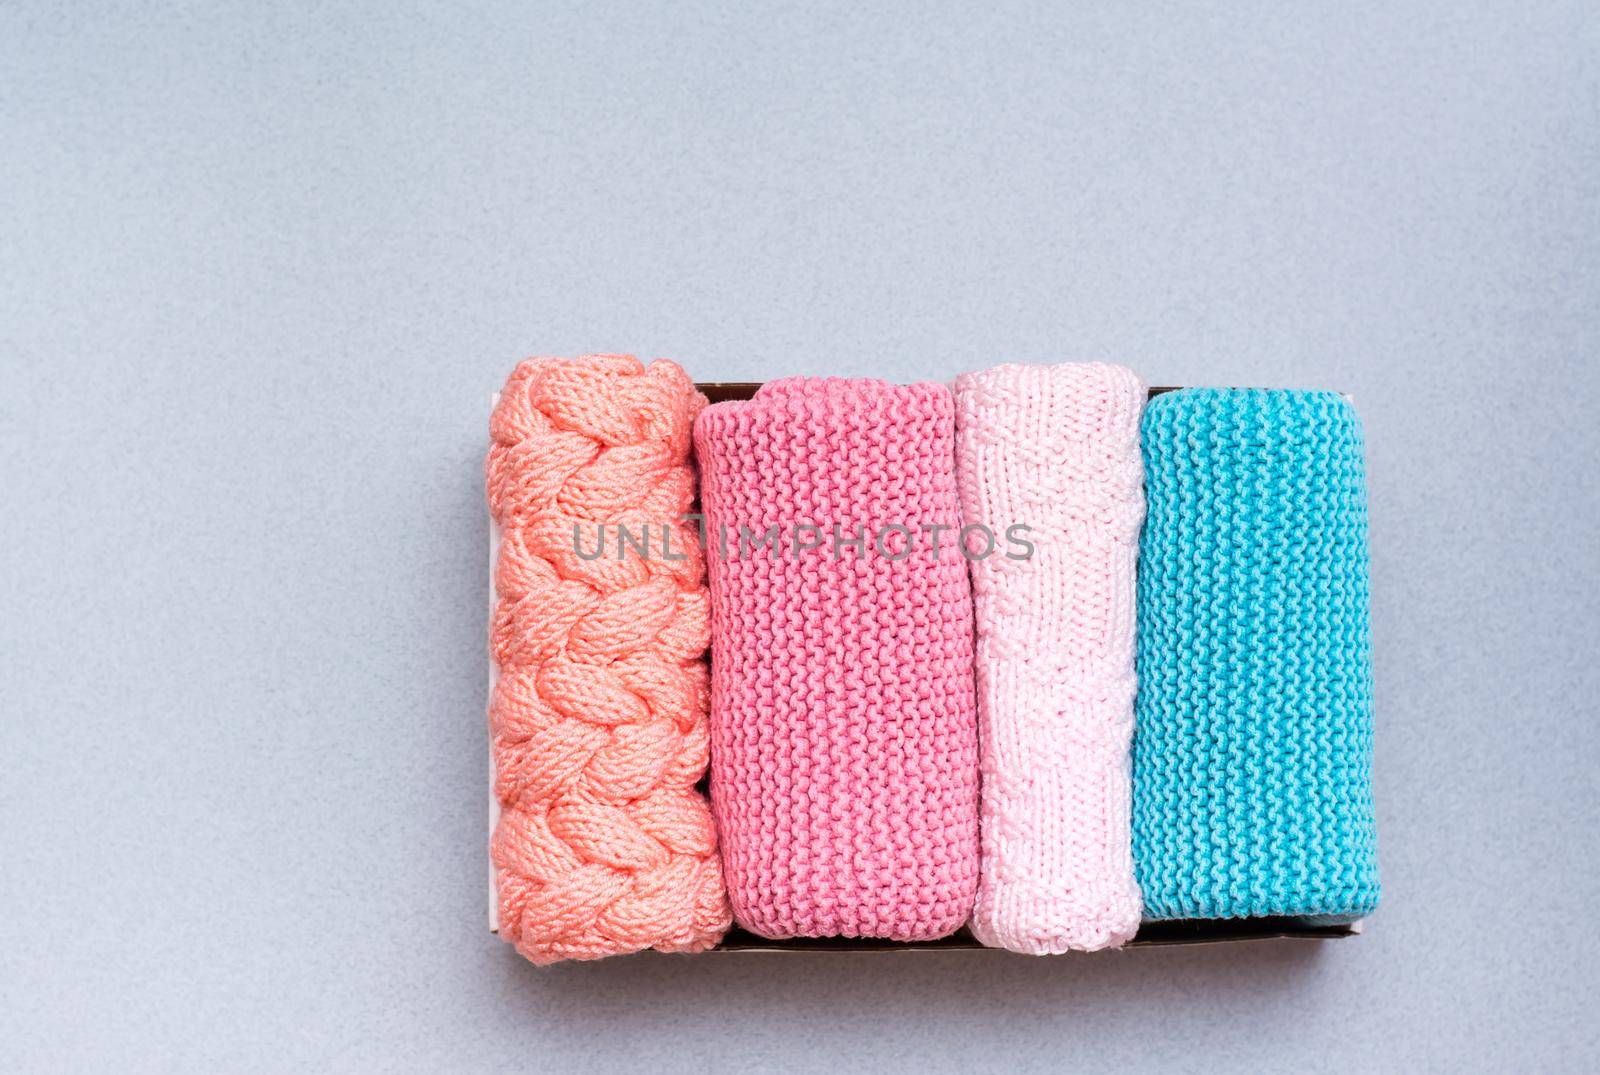 Organization and order. Knitted clothes lie neatly folded in a box on a gray background. Top view by Aleruana